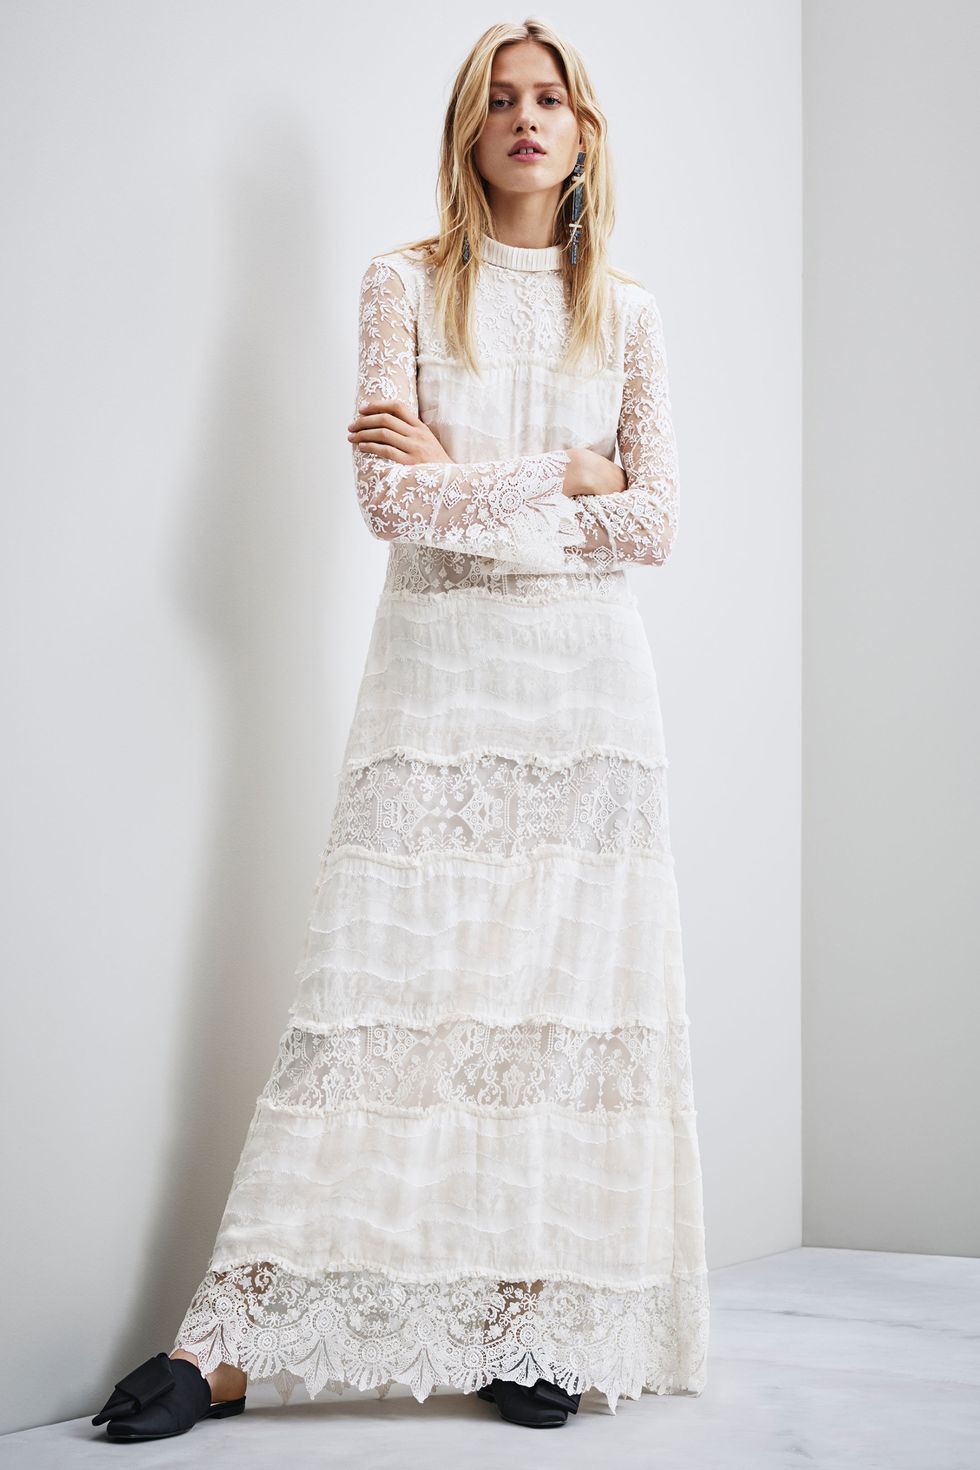 H&M launch a wedding dress collection